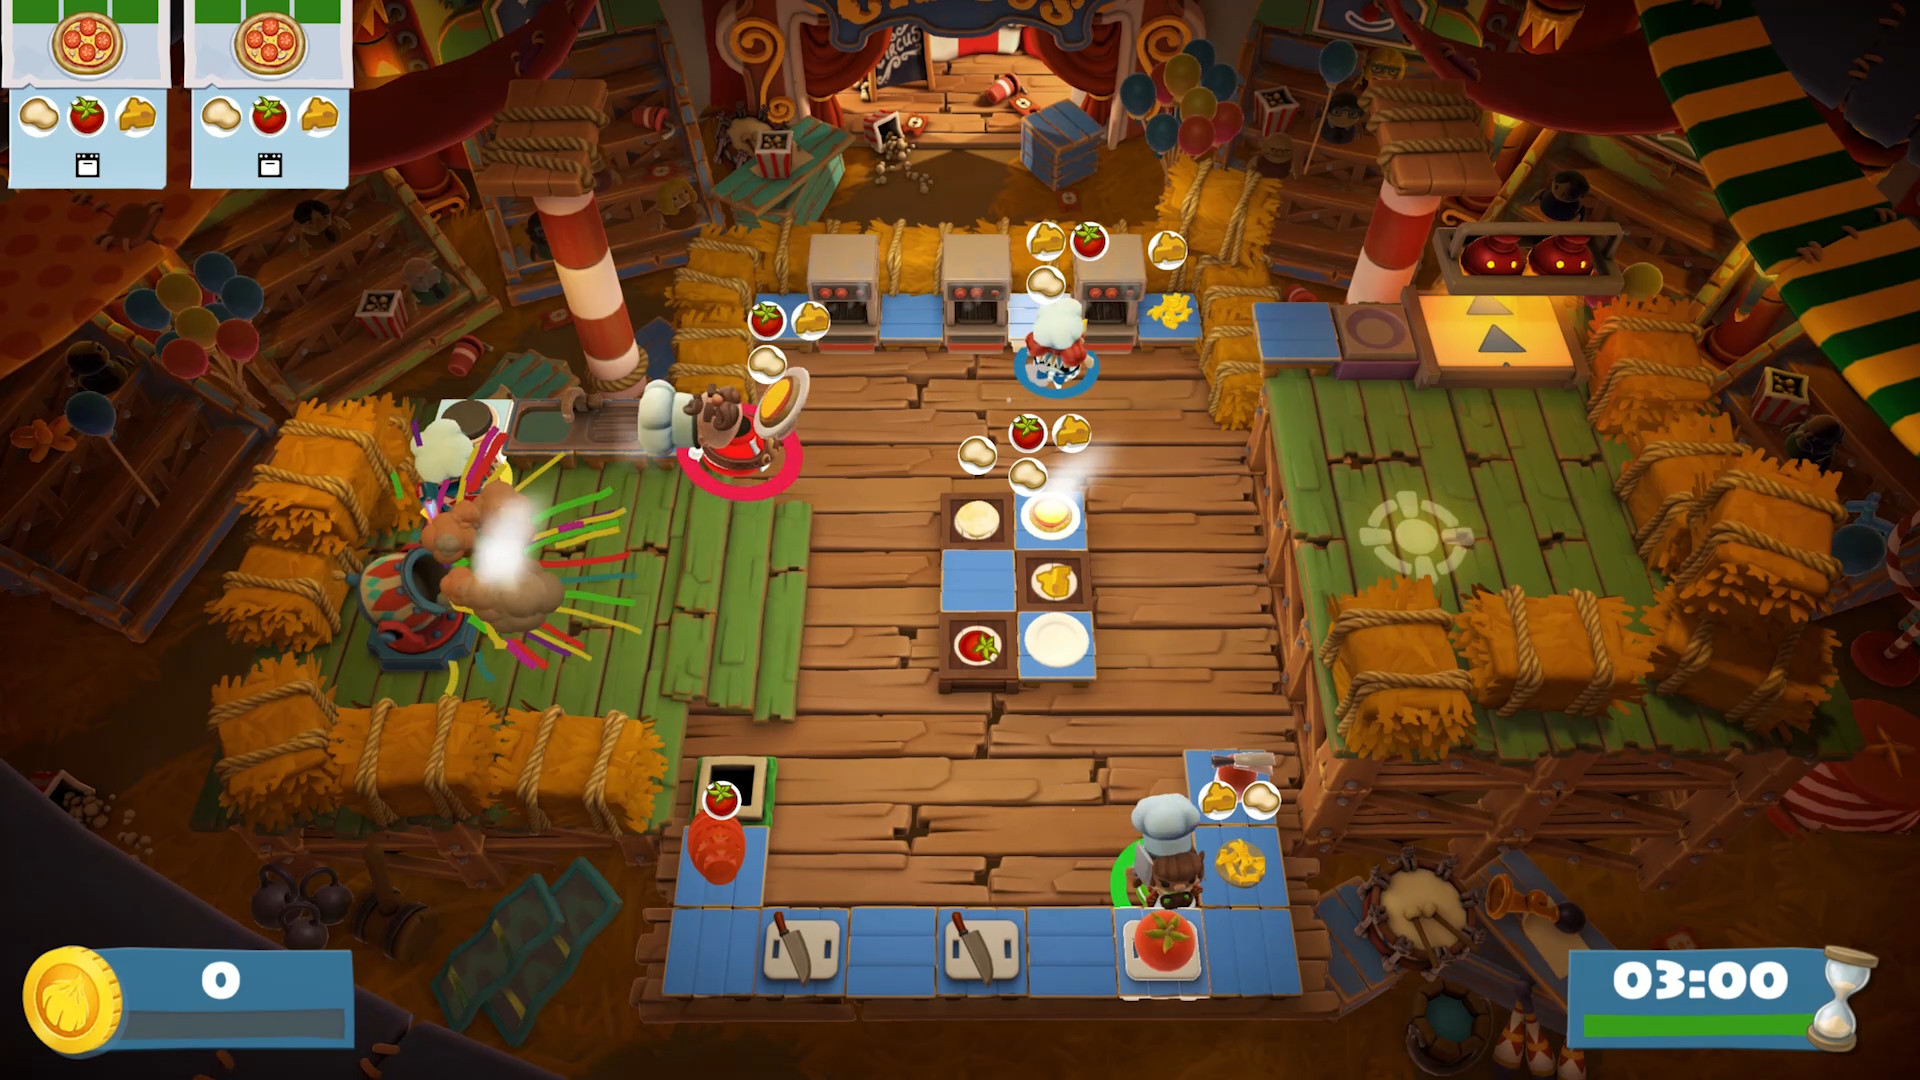 Save 48% on Overcooked! 2 - Carnival of Chaos on Steam